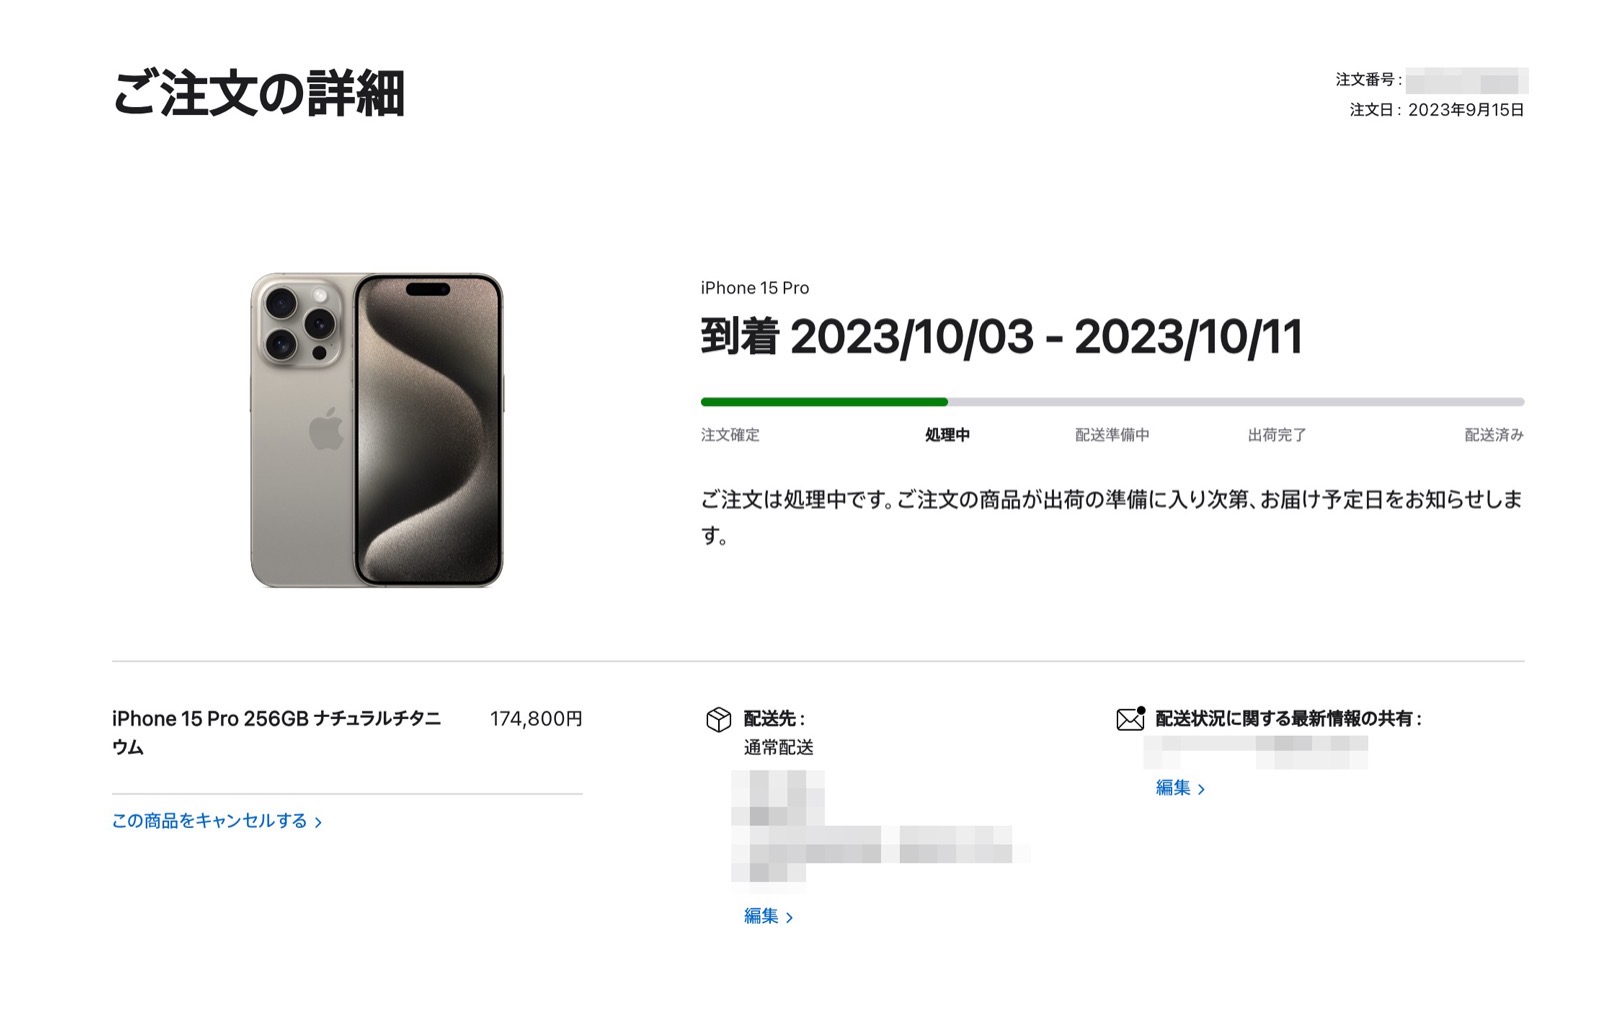 I failed the iphone15pro preorder